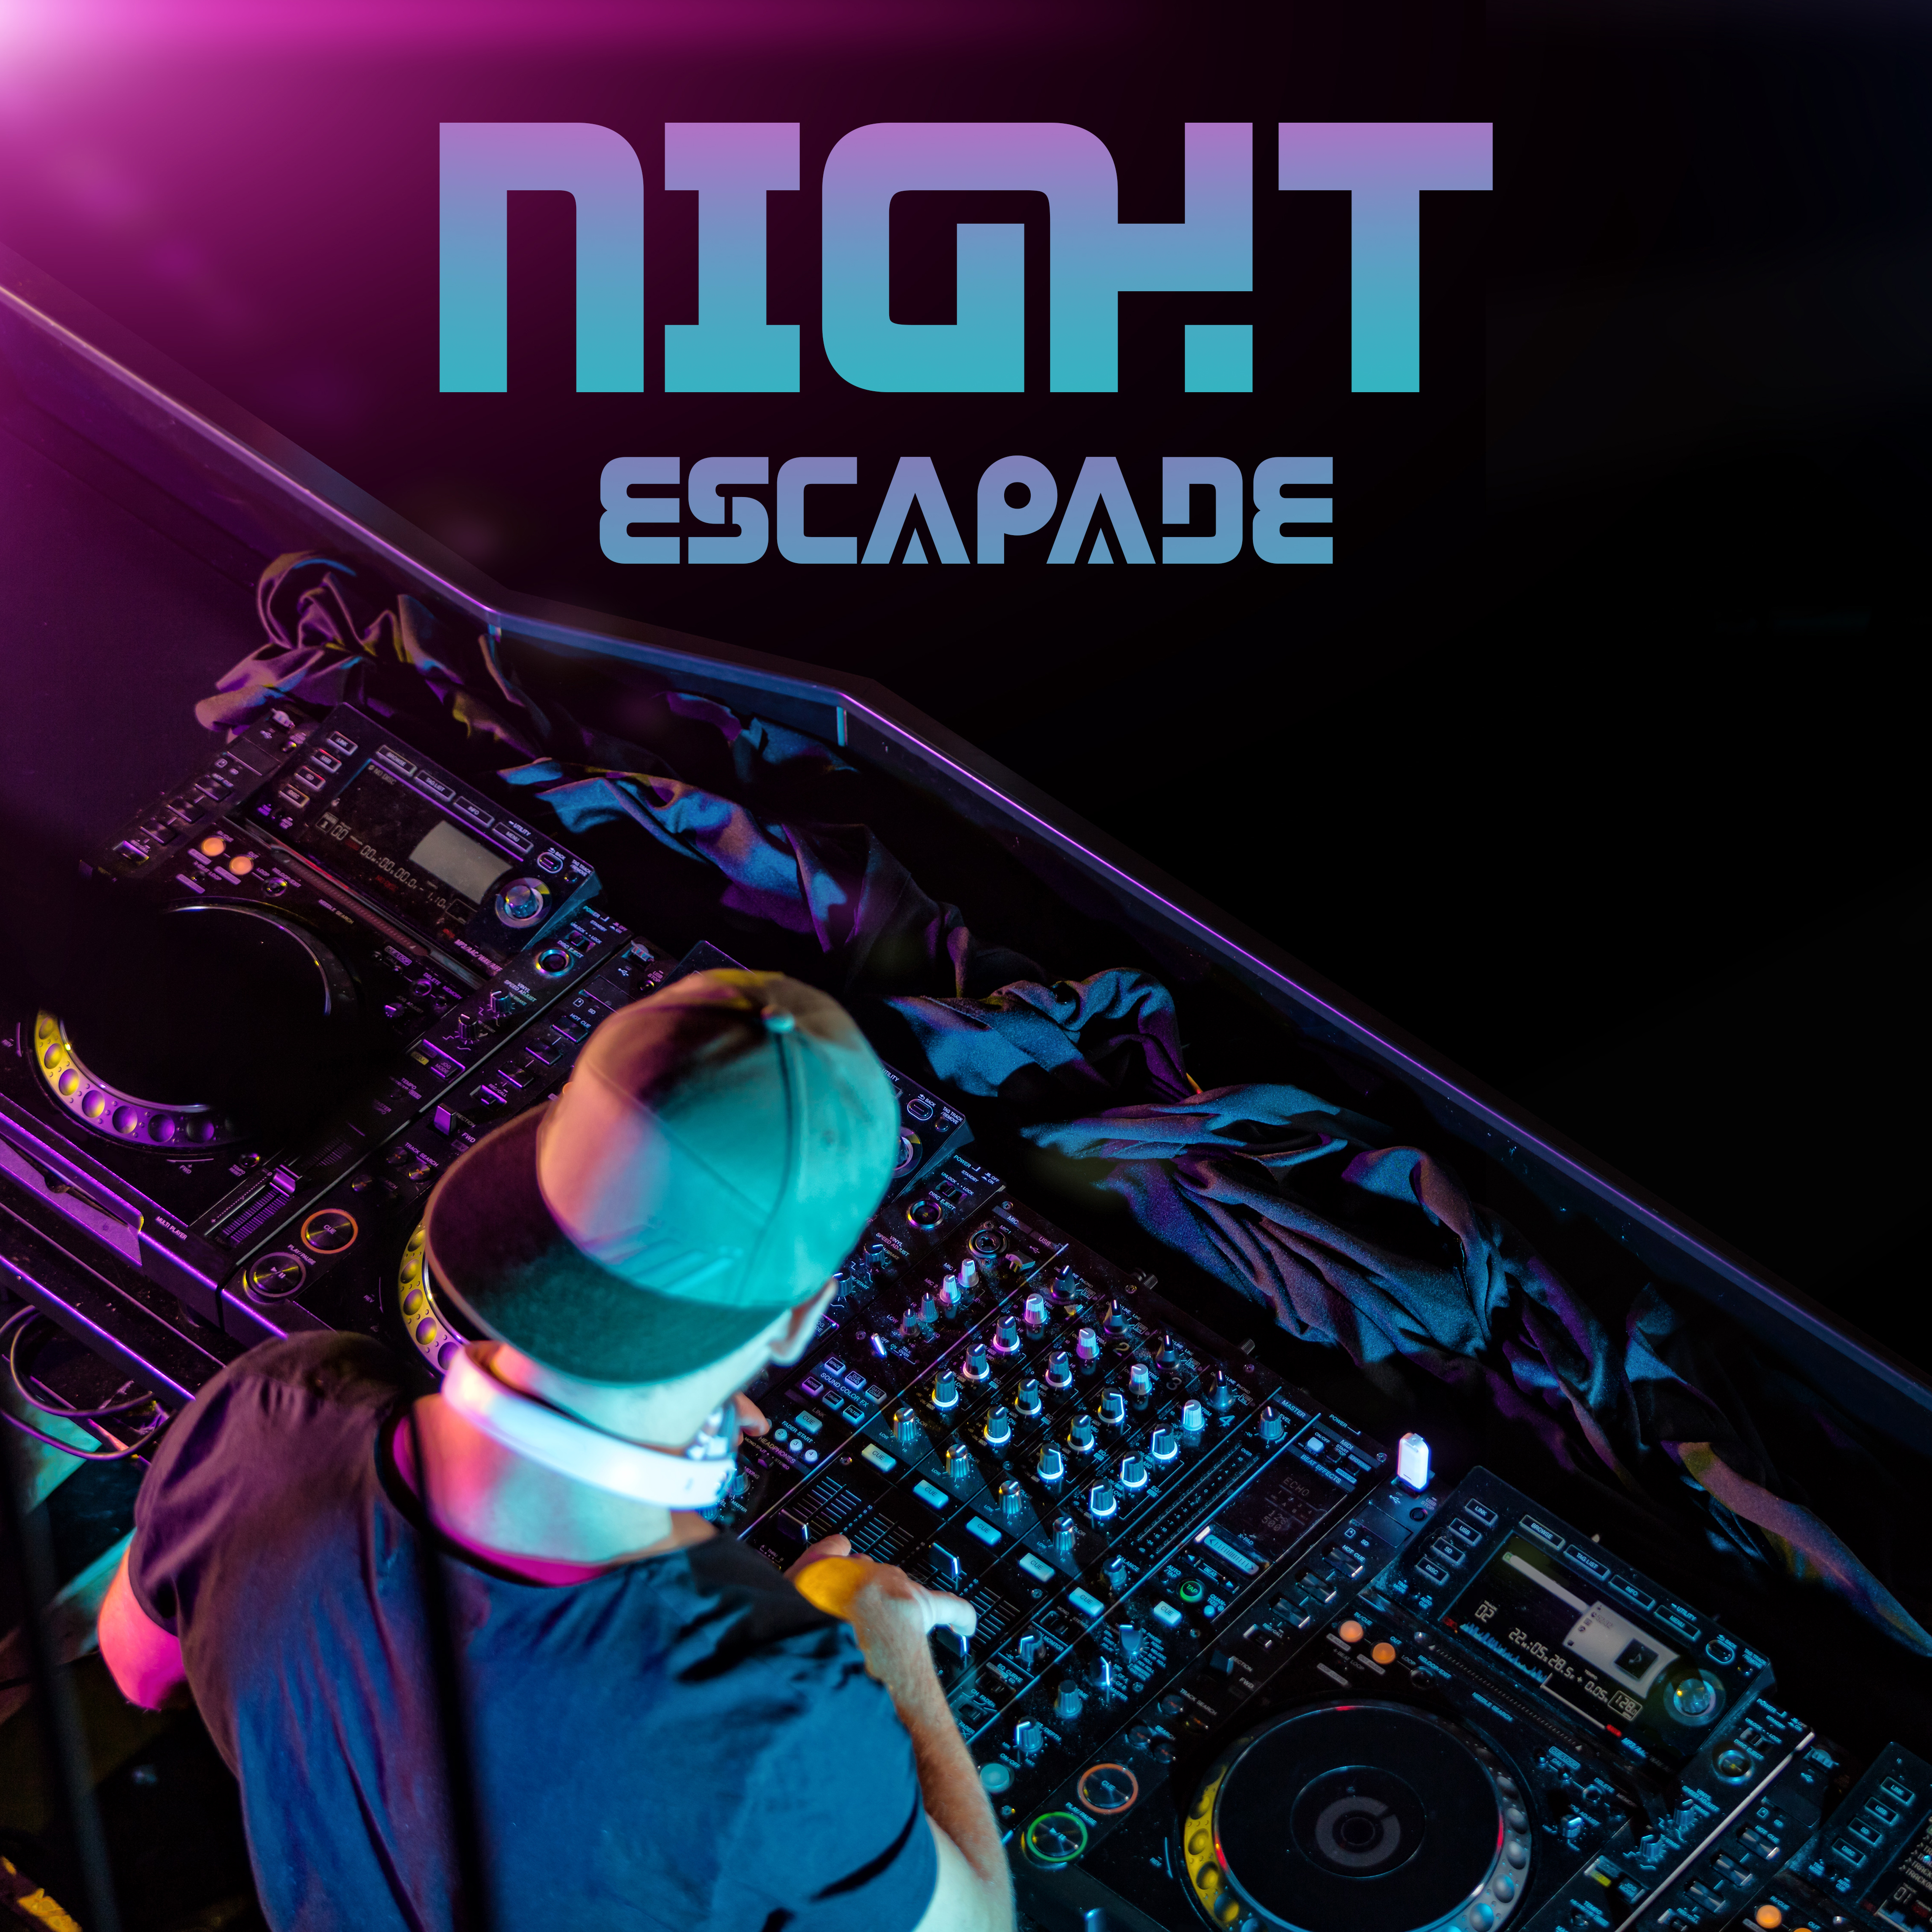 Night Escapade: Club Rhythms that will Start the Party, the ******* Party Songs for Dancing, Great Fun and Epic Melange